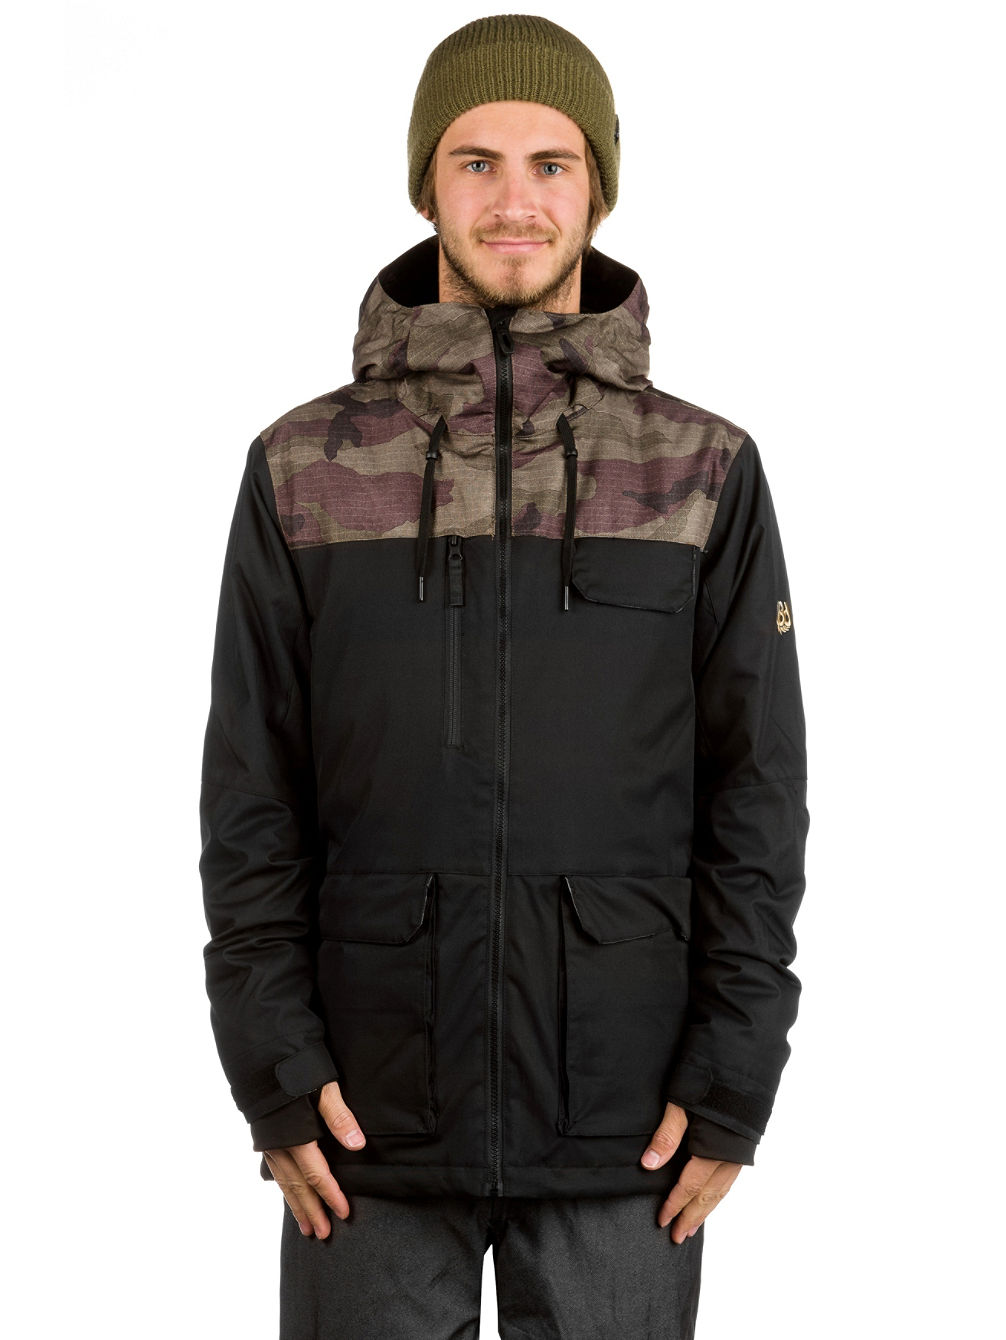 Sixer Insulated Jacket